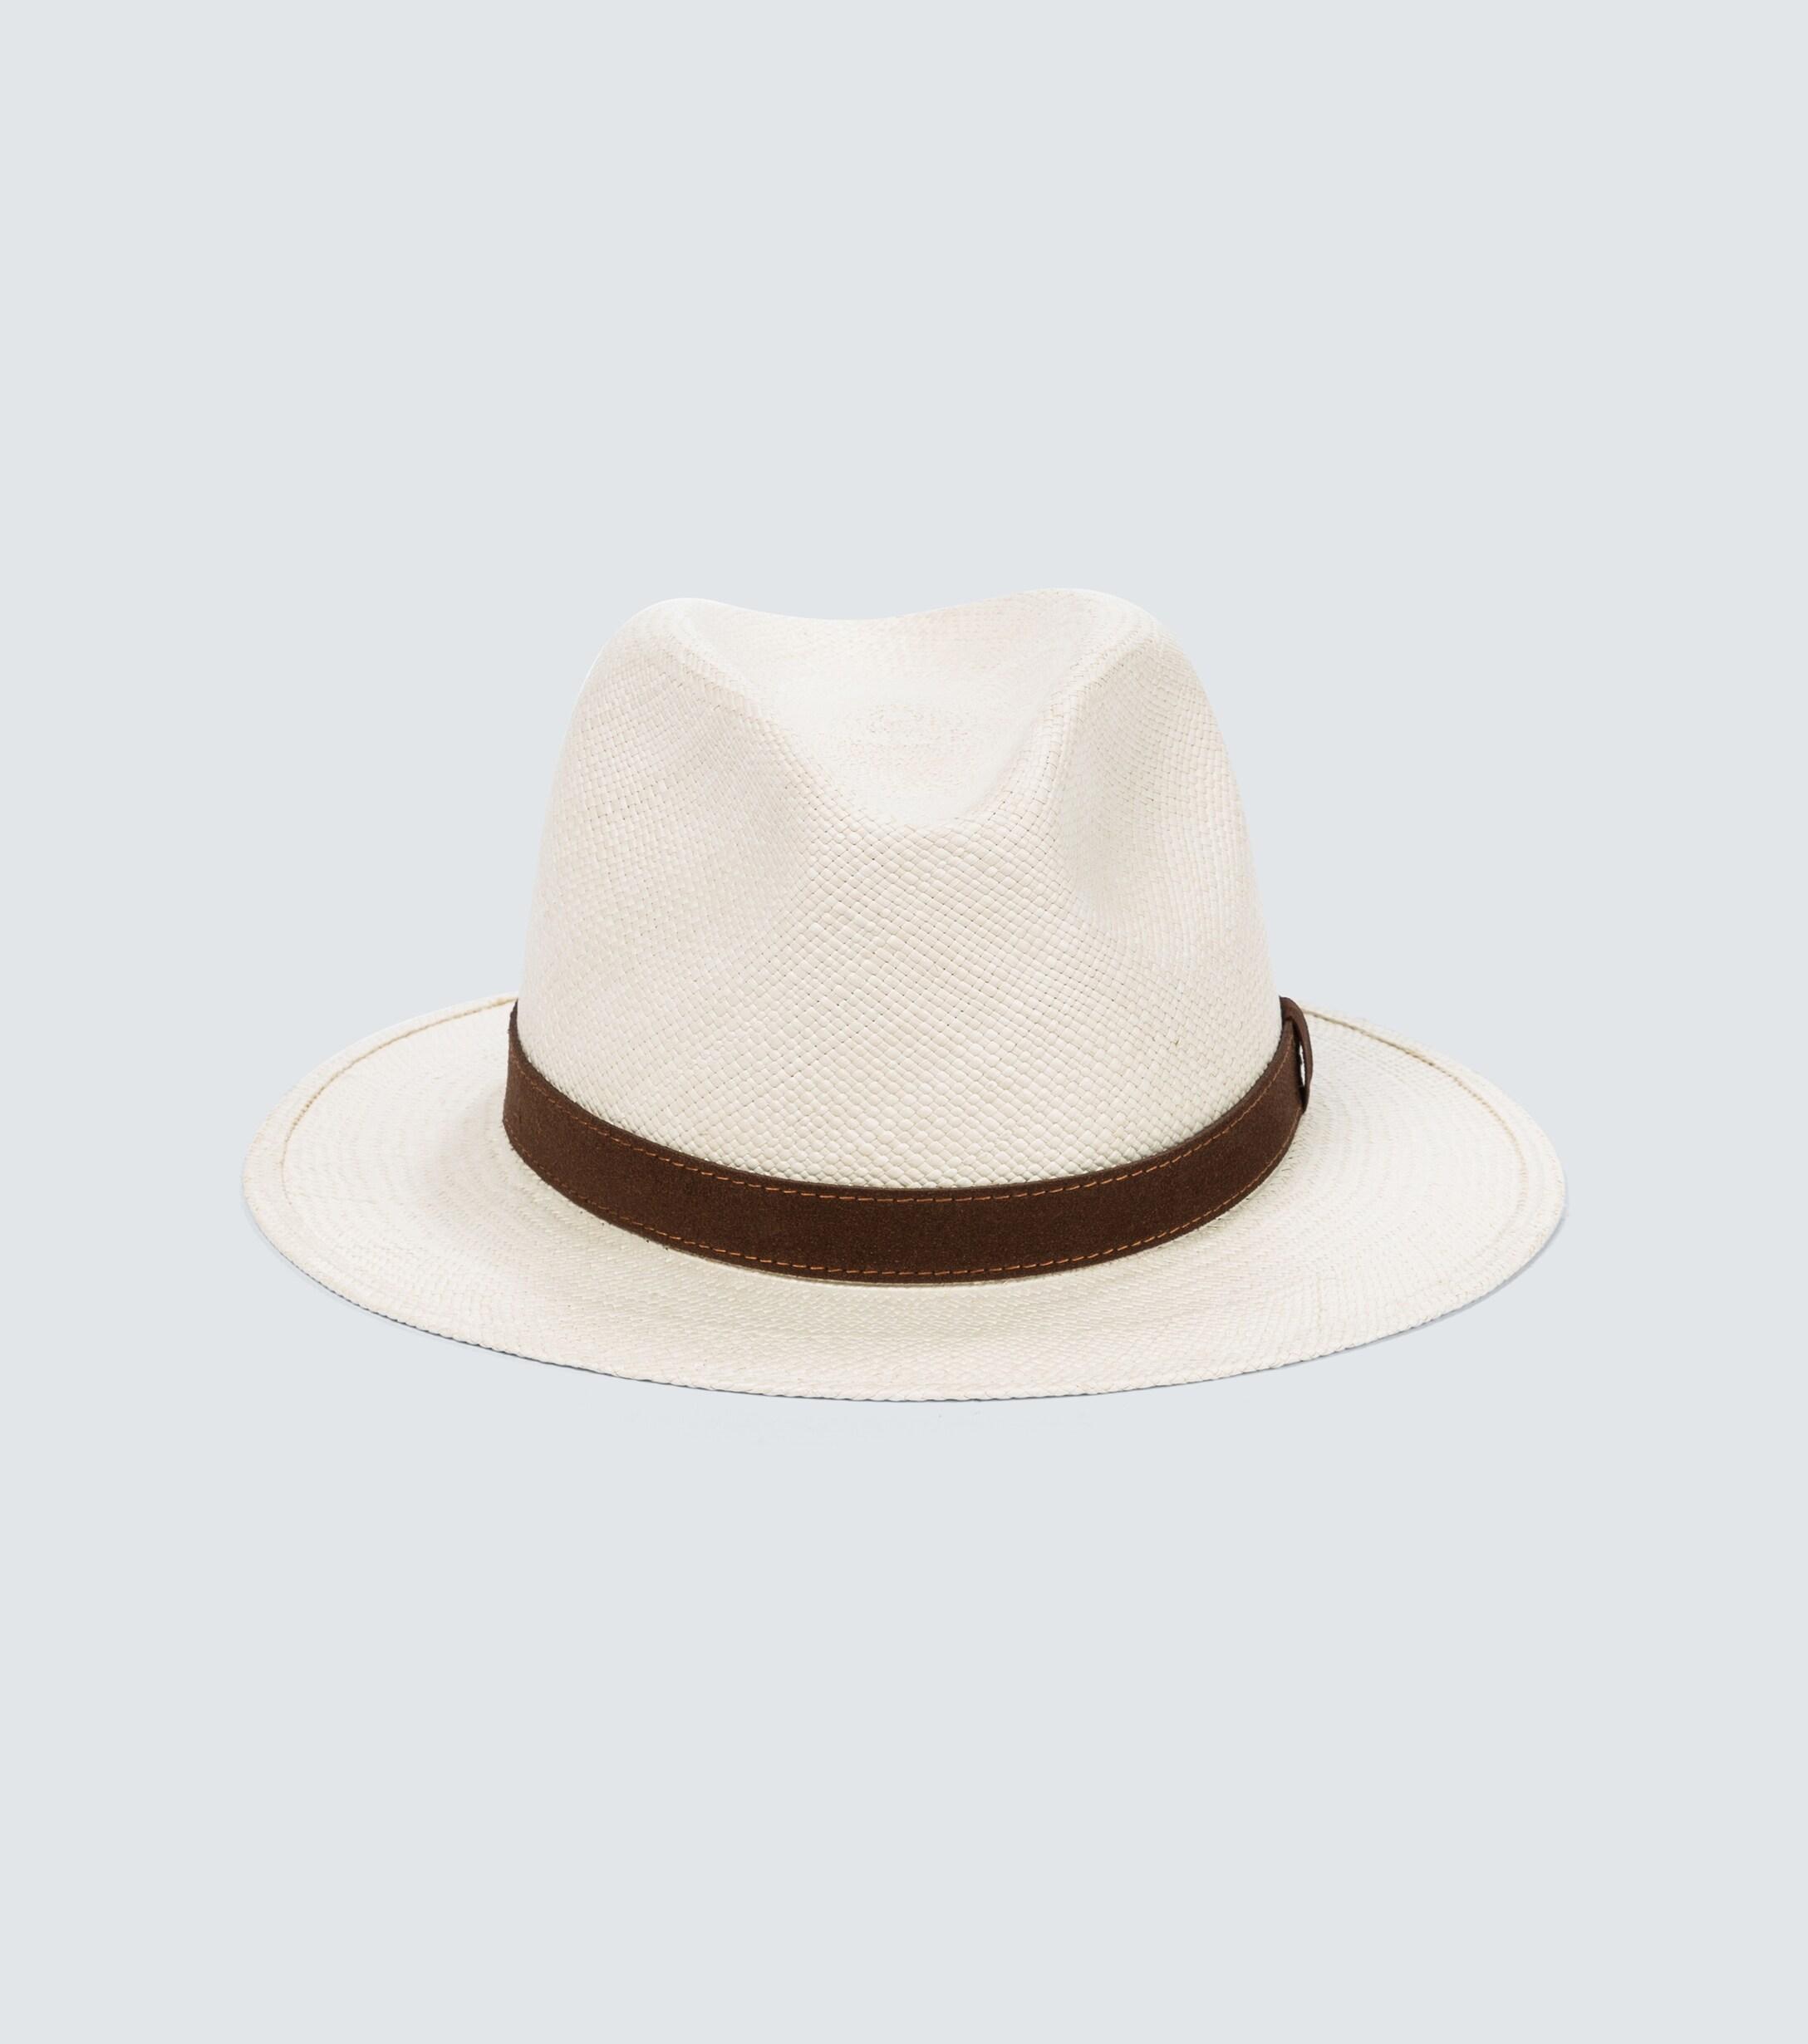 Borsalino Country Panama Quito Straw Hat in Beige (Natural) for Men - Lyst